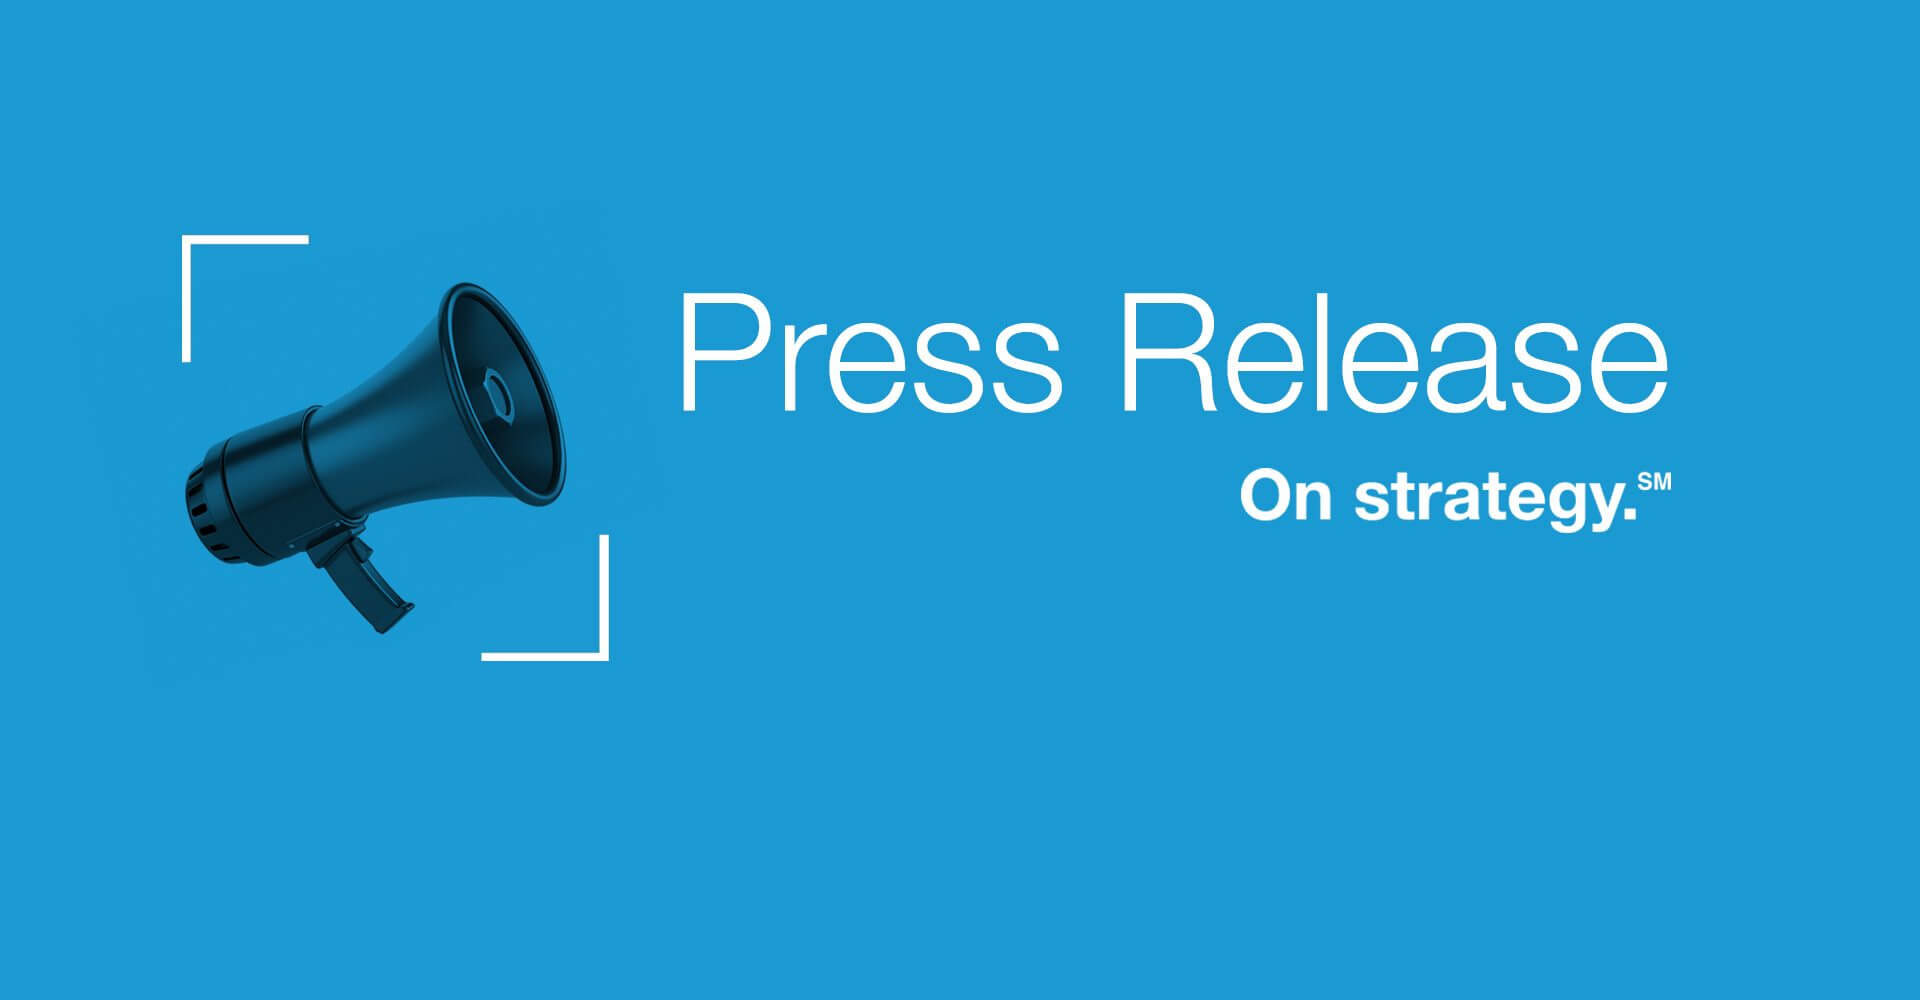 Press Release, On Strategy